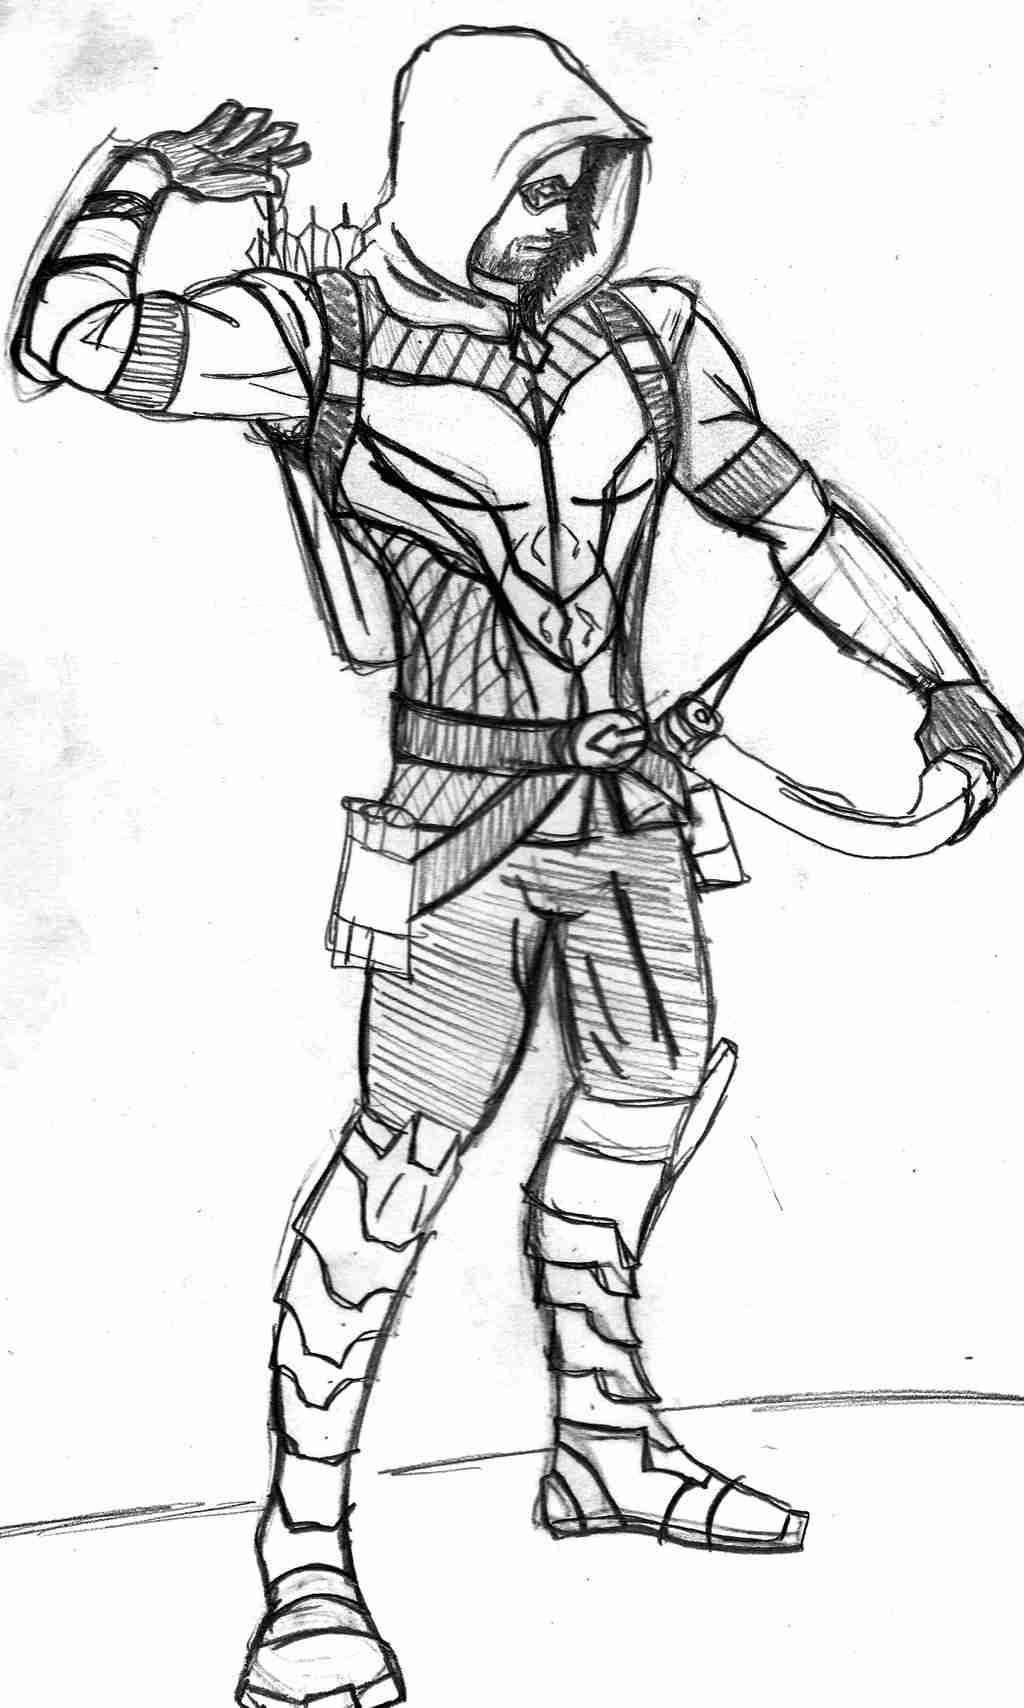 Green Arrow Printable Coloring Pages at GetColoringscom